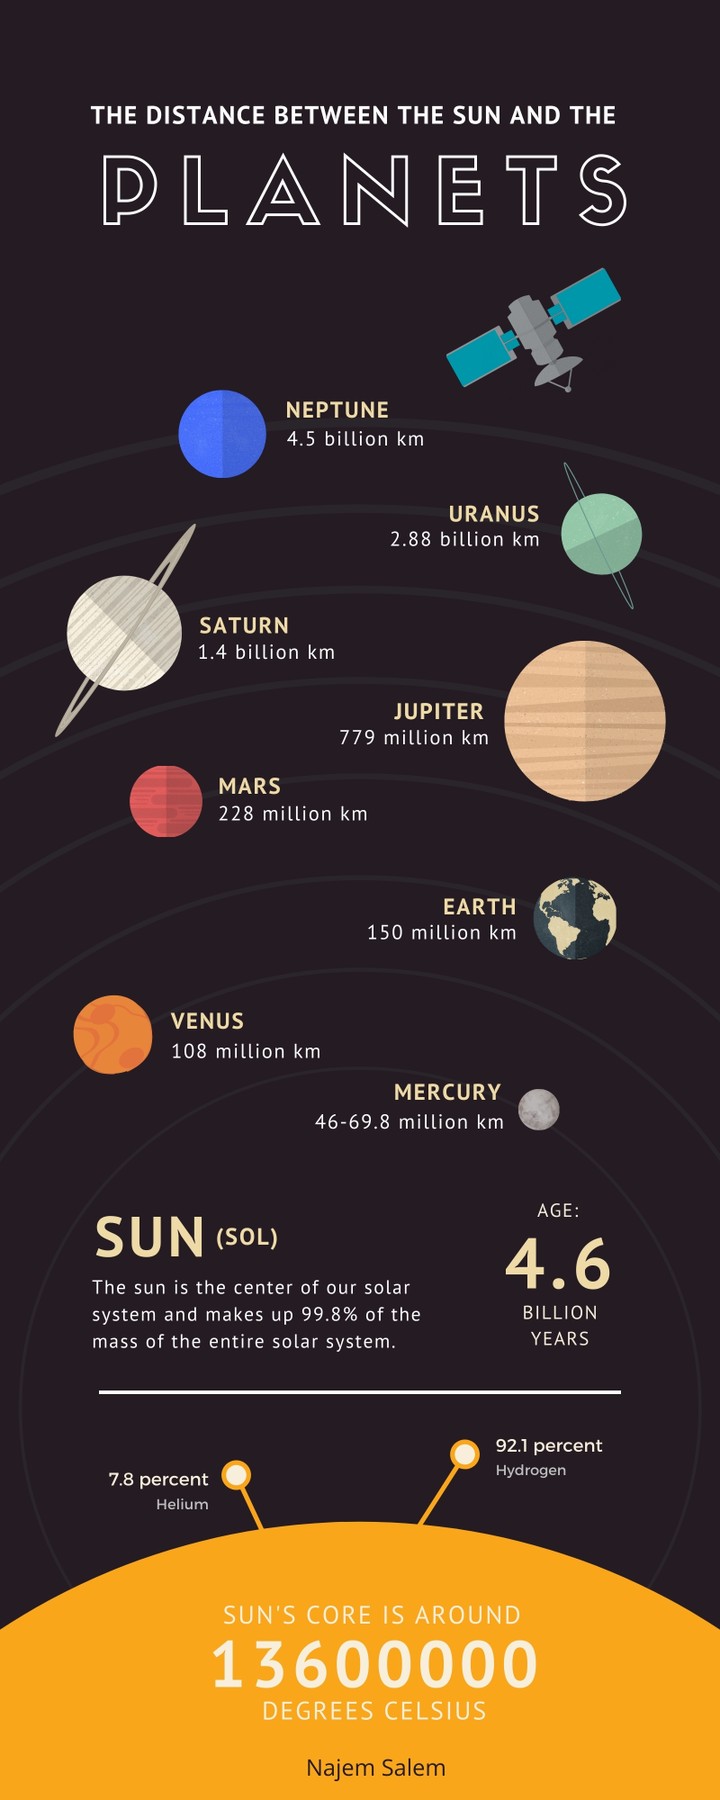 Planets infographic for LSS school